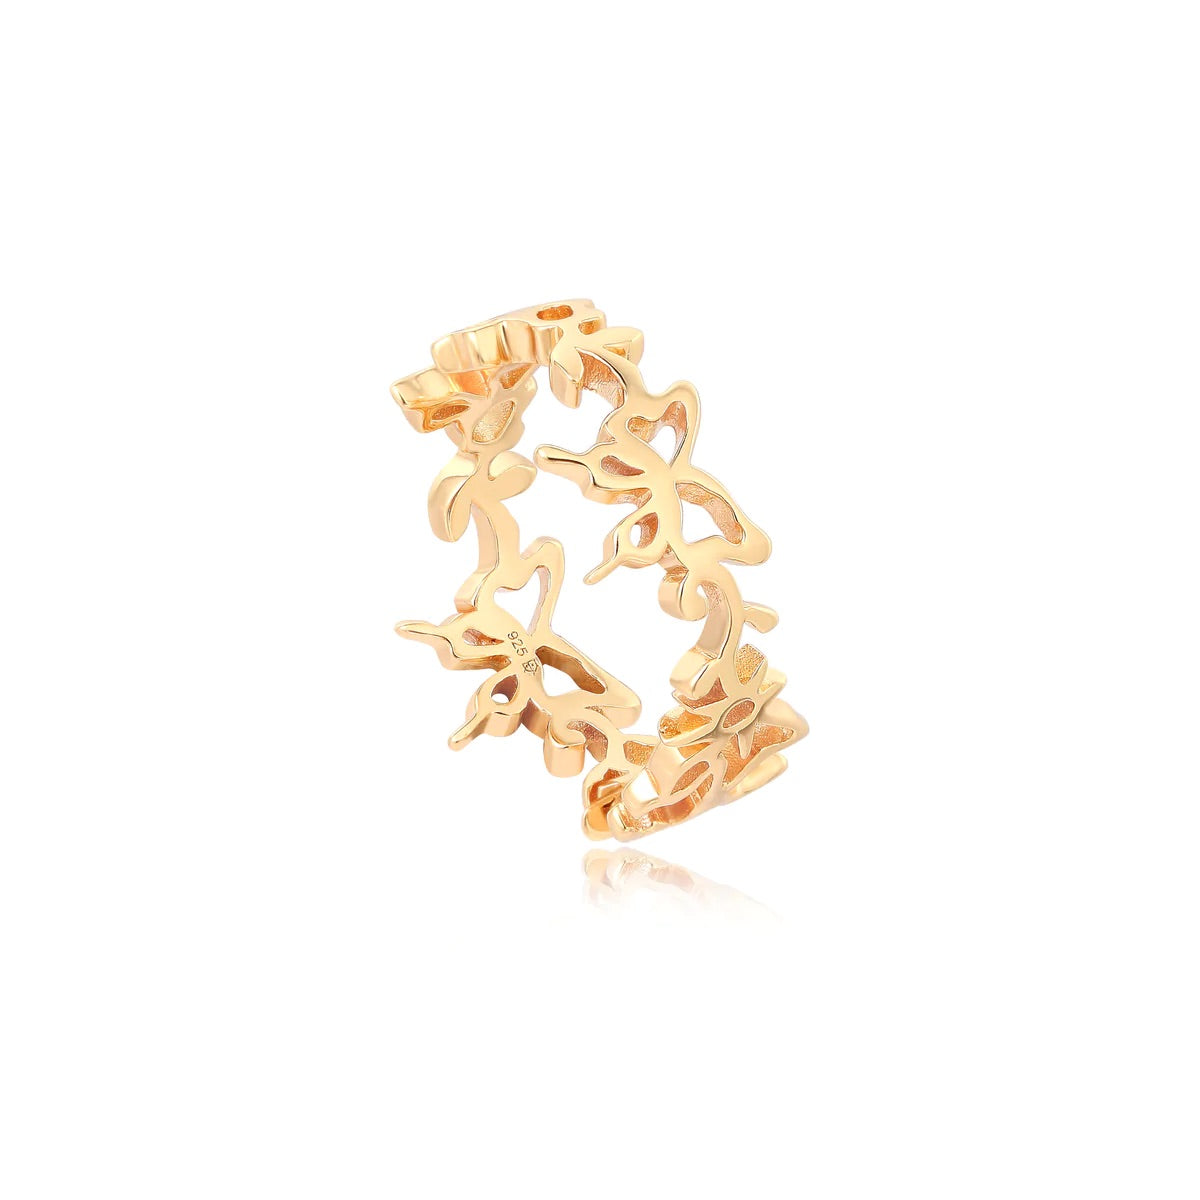 Abstracr Butterflies Lace Ring